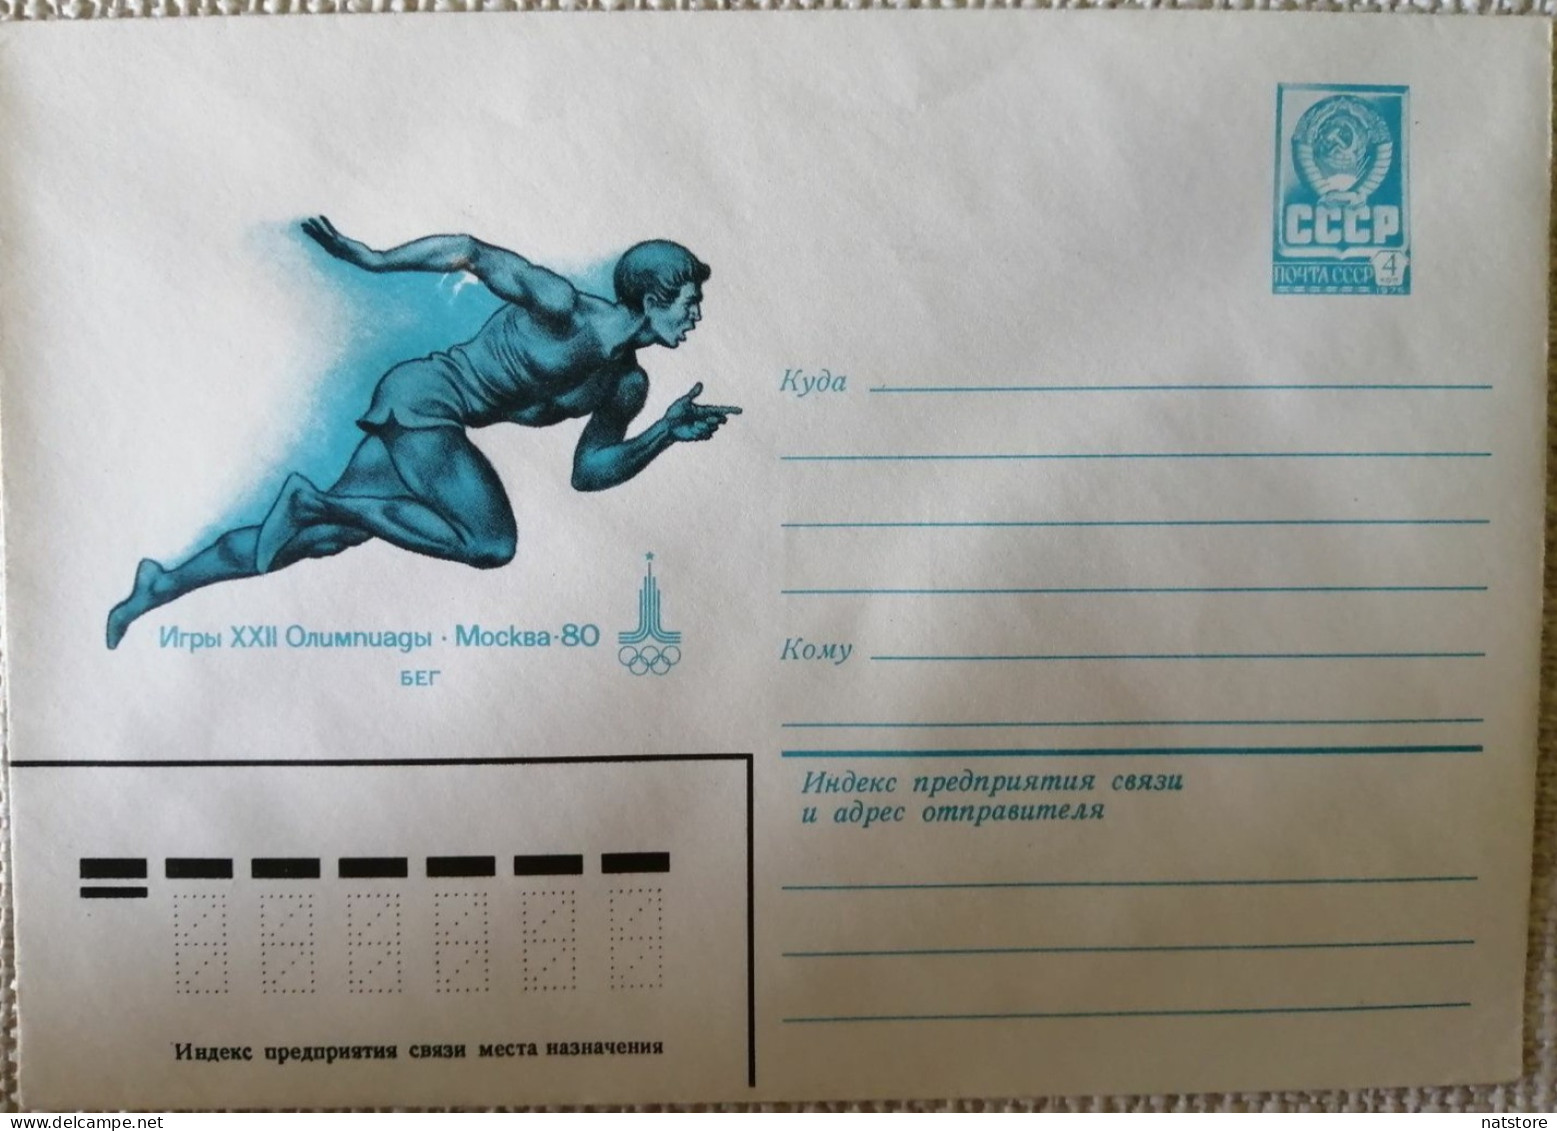 1980 VINTAGE ENVELOPE WITH PRINTED STAMP. " GAMES OF THE XXII OLYMPIAD.MOSCOW...1980"  .RUN. NEW - Ete 1980: Moscou